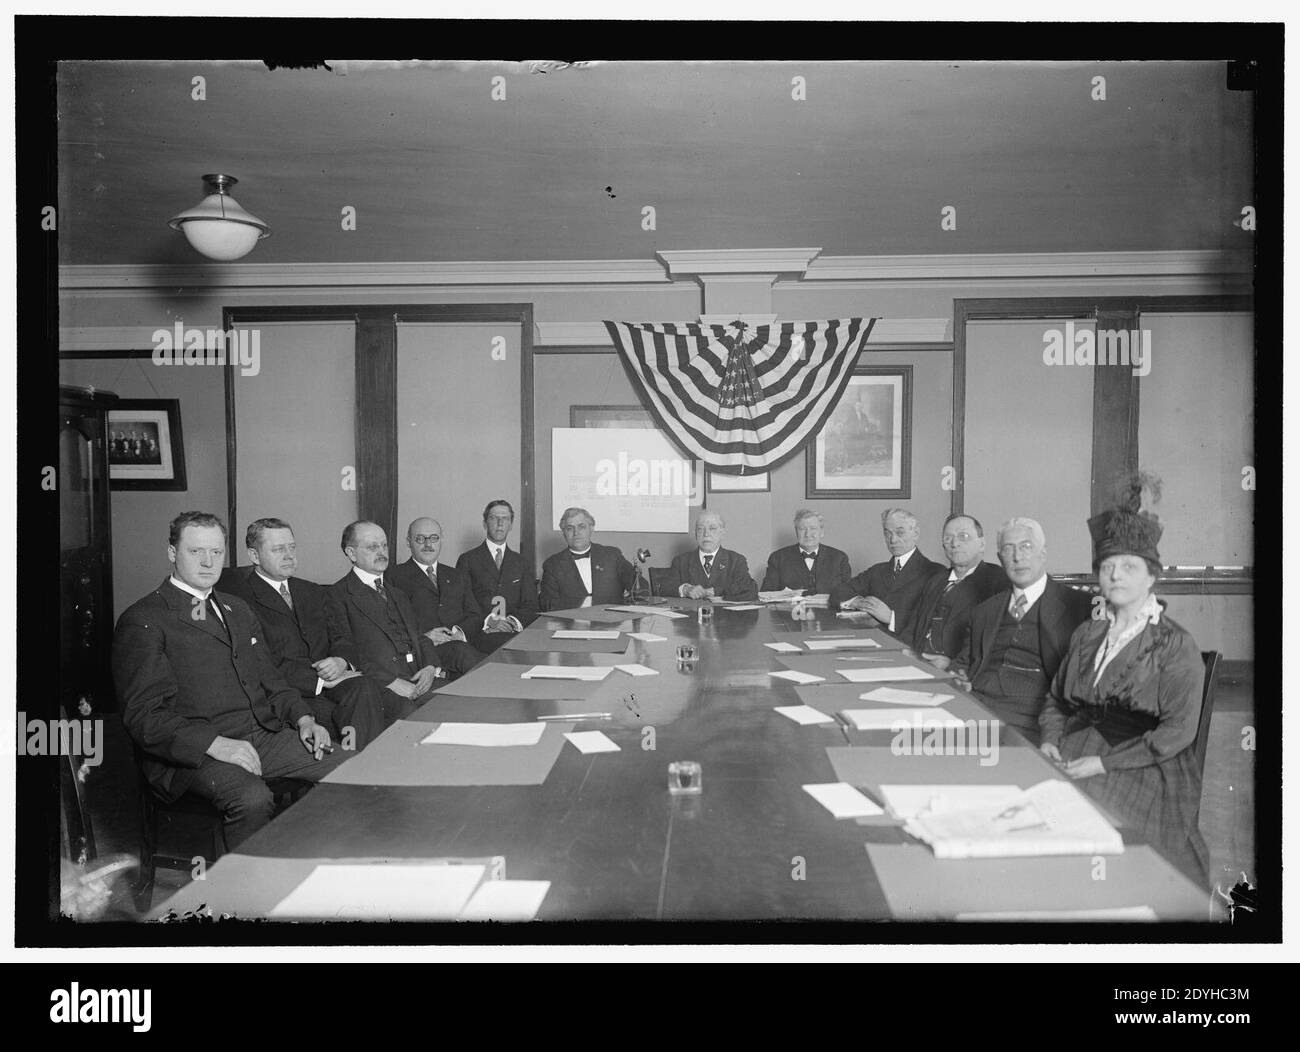 LABOR COMM. OF COUNCIL OF NAT. DEF. JAMES LORD; ELISHA LEE; E. PARKER NEVIN; LEWIS B. SCHRAM; EDWARD EVERETT MACY; FRANK MORRISON; SAMUEL GOMPERS, CHAIRMAN; W.B. WILSON; JAMES O'CONNELL; Stock Photo